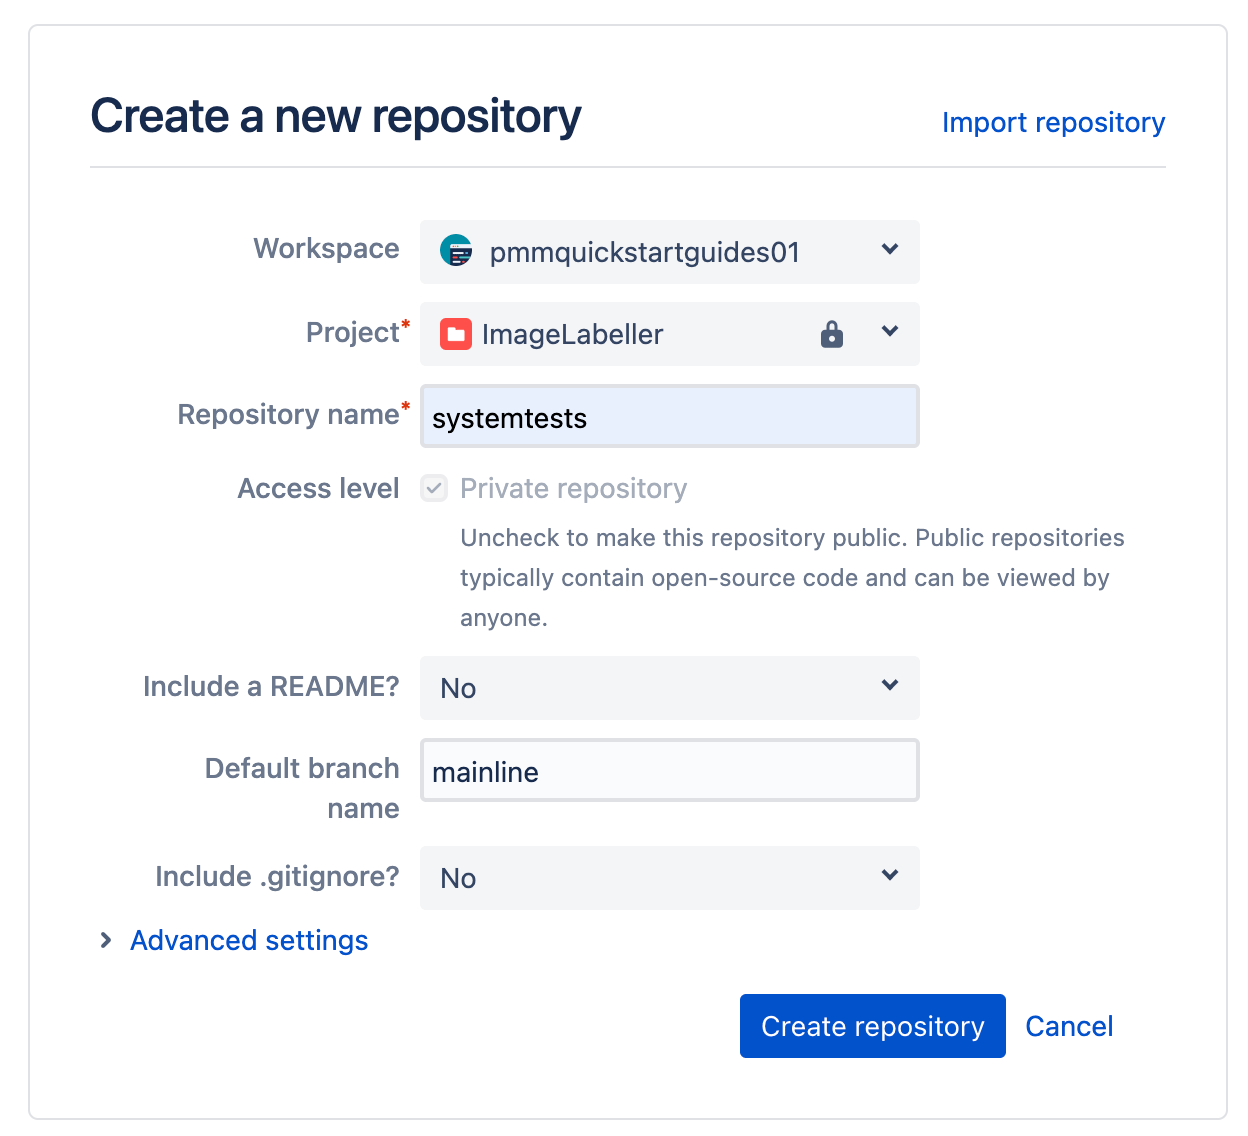 Entering information when creating a new repository in Bitbucket